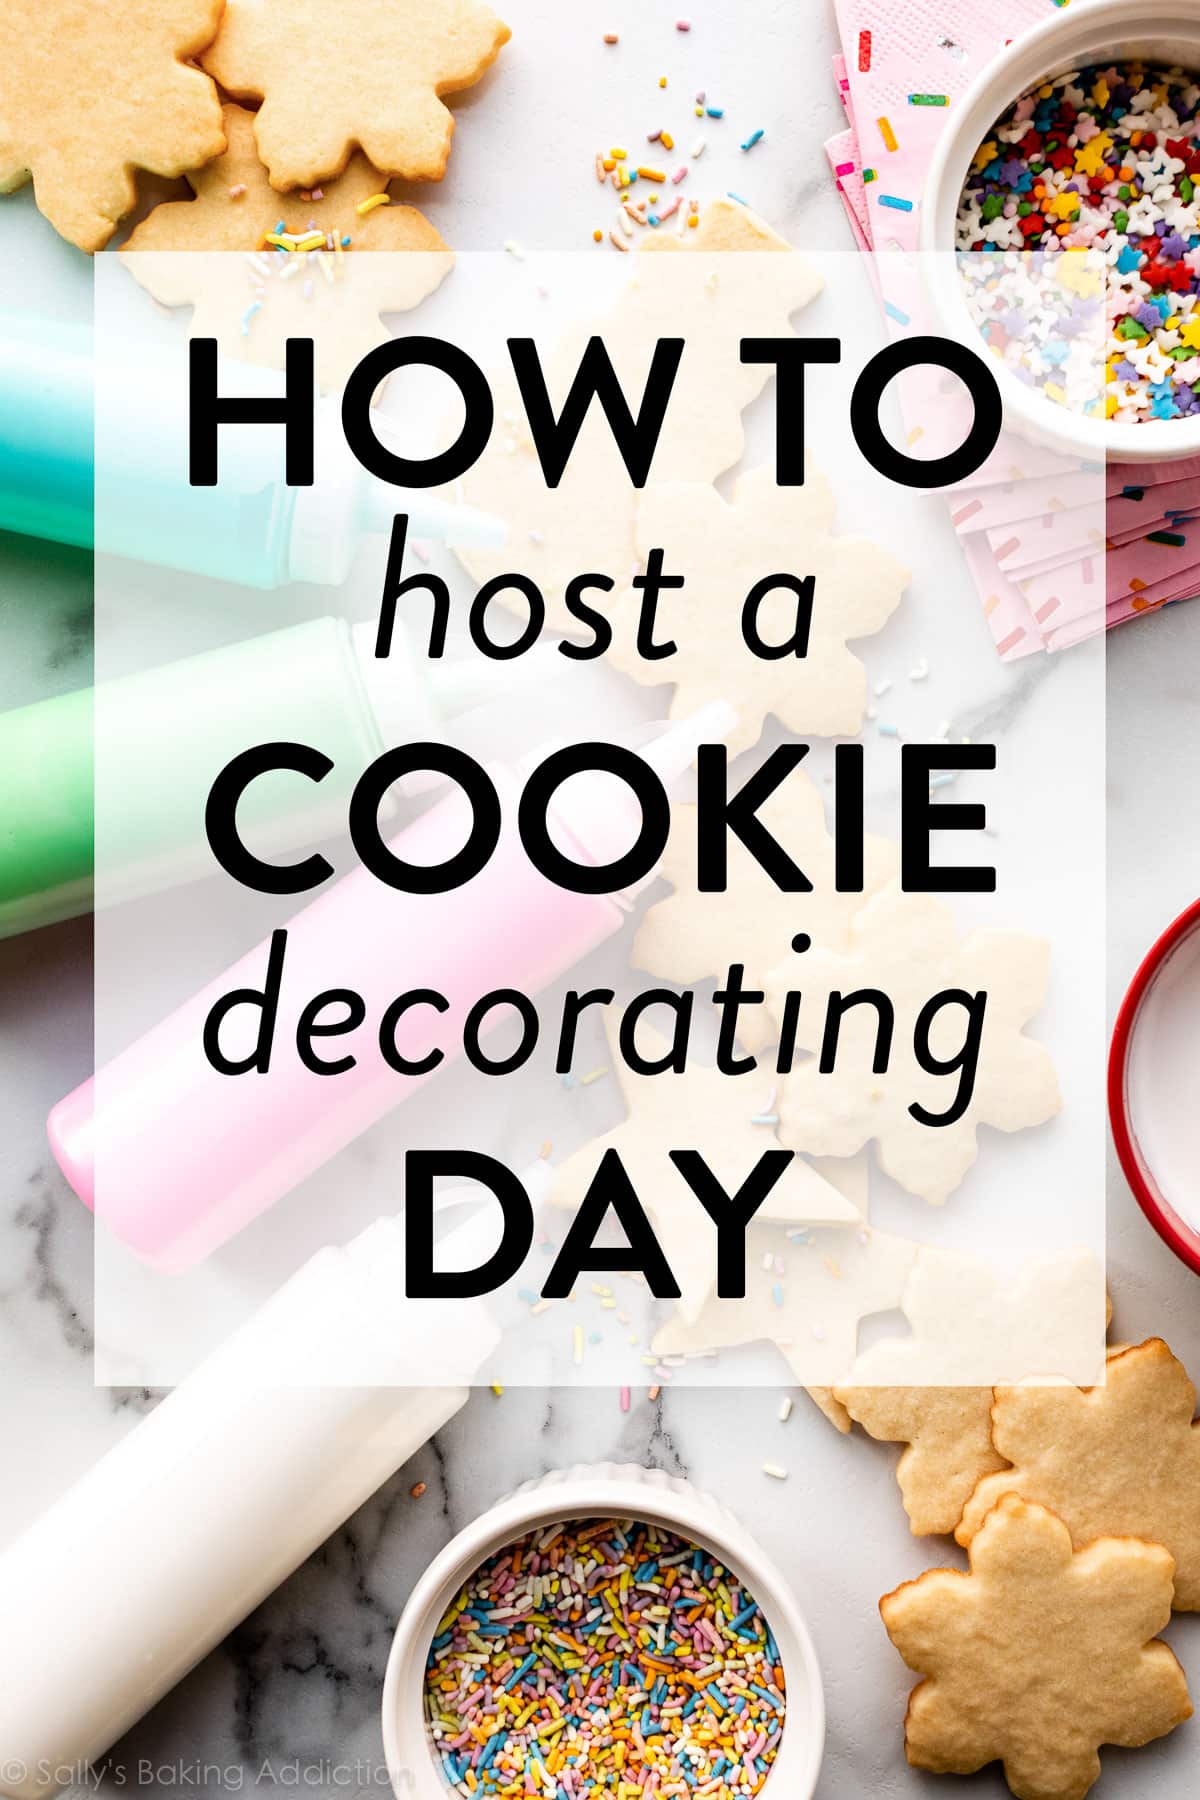 how to host a cookie decorating day graphic